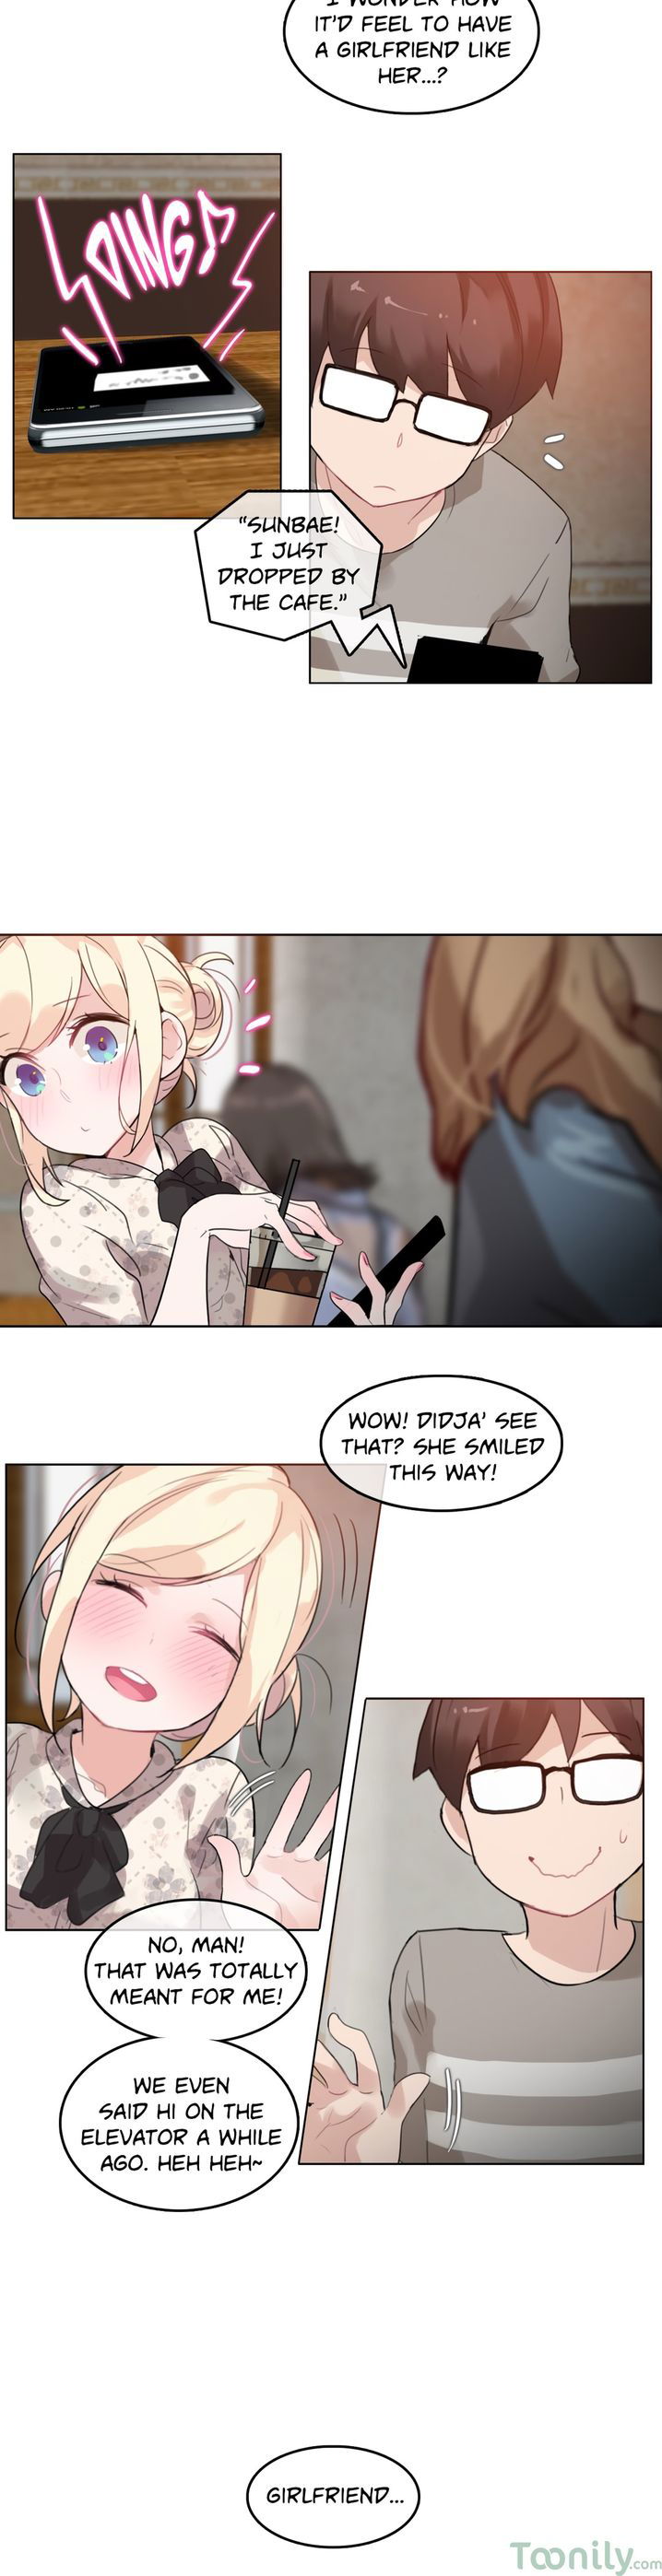 a-perverts-daily-life-chap-28-2